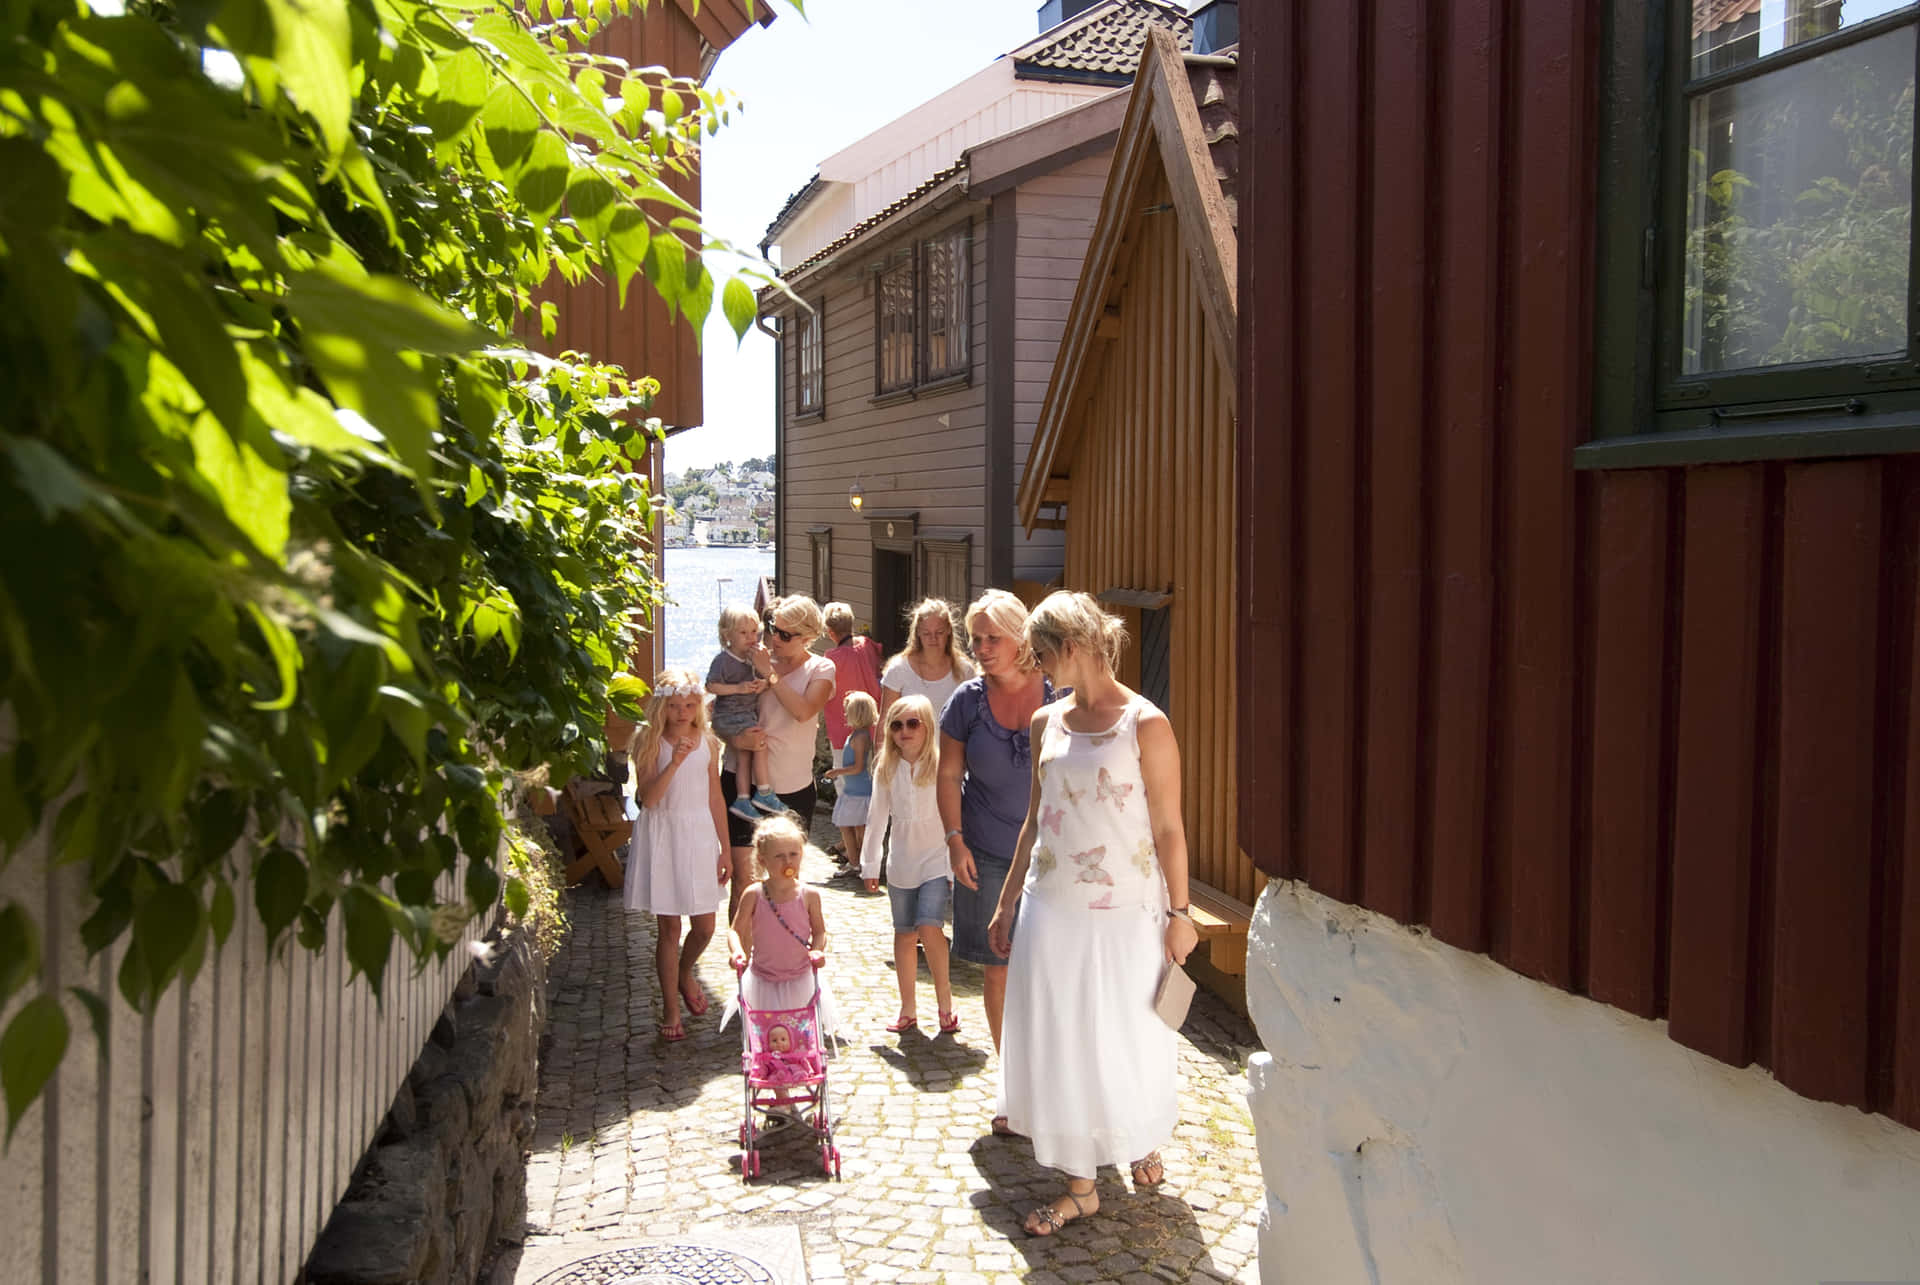 Sunny Dayin Arendal Old Town Wallpaper